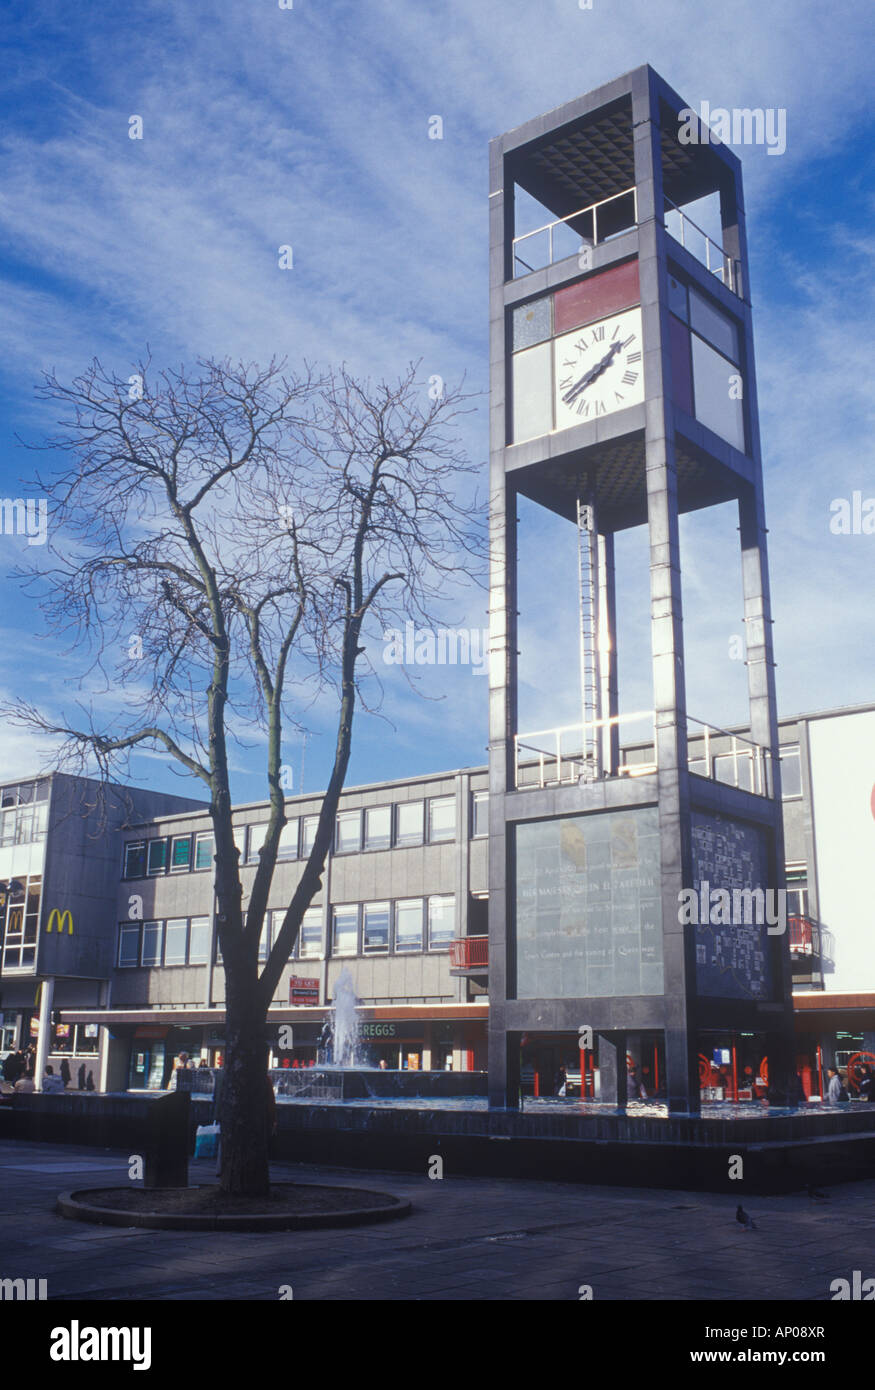 Town Square Stevenage  Hertfordshire UK Centre of Post war new town with clock tower and shopping precinct opened April 1959 Stock Photo